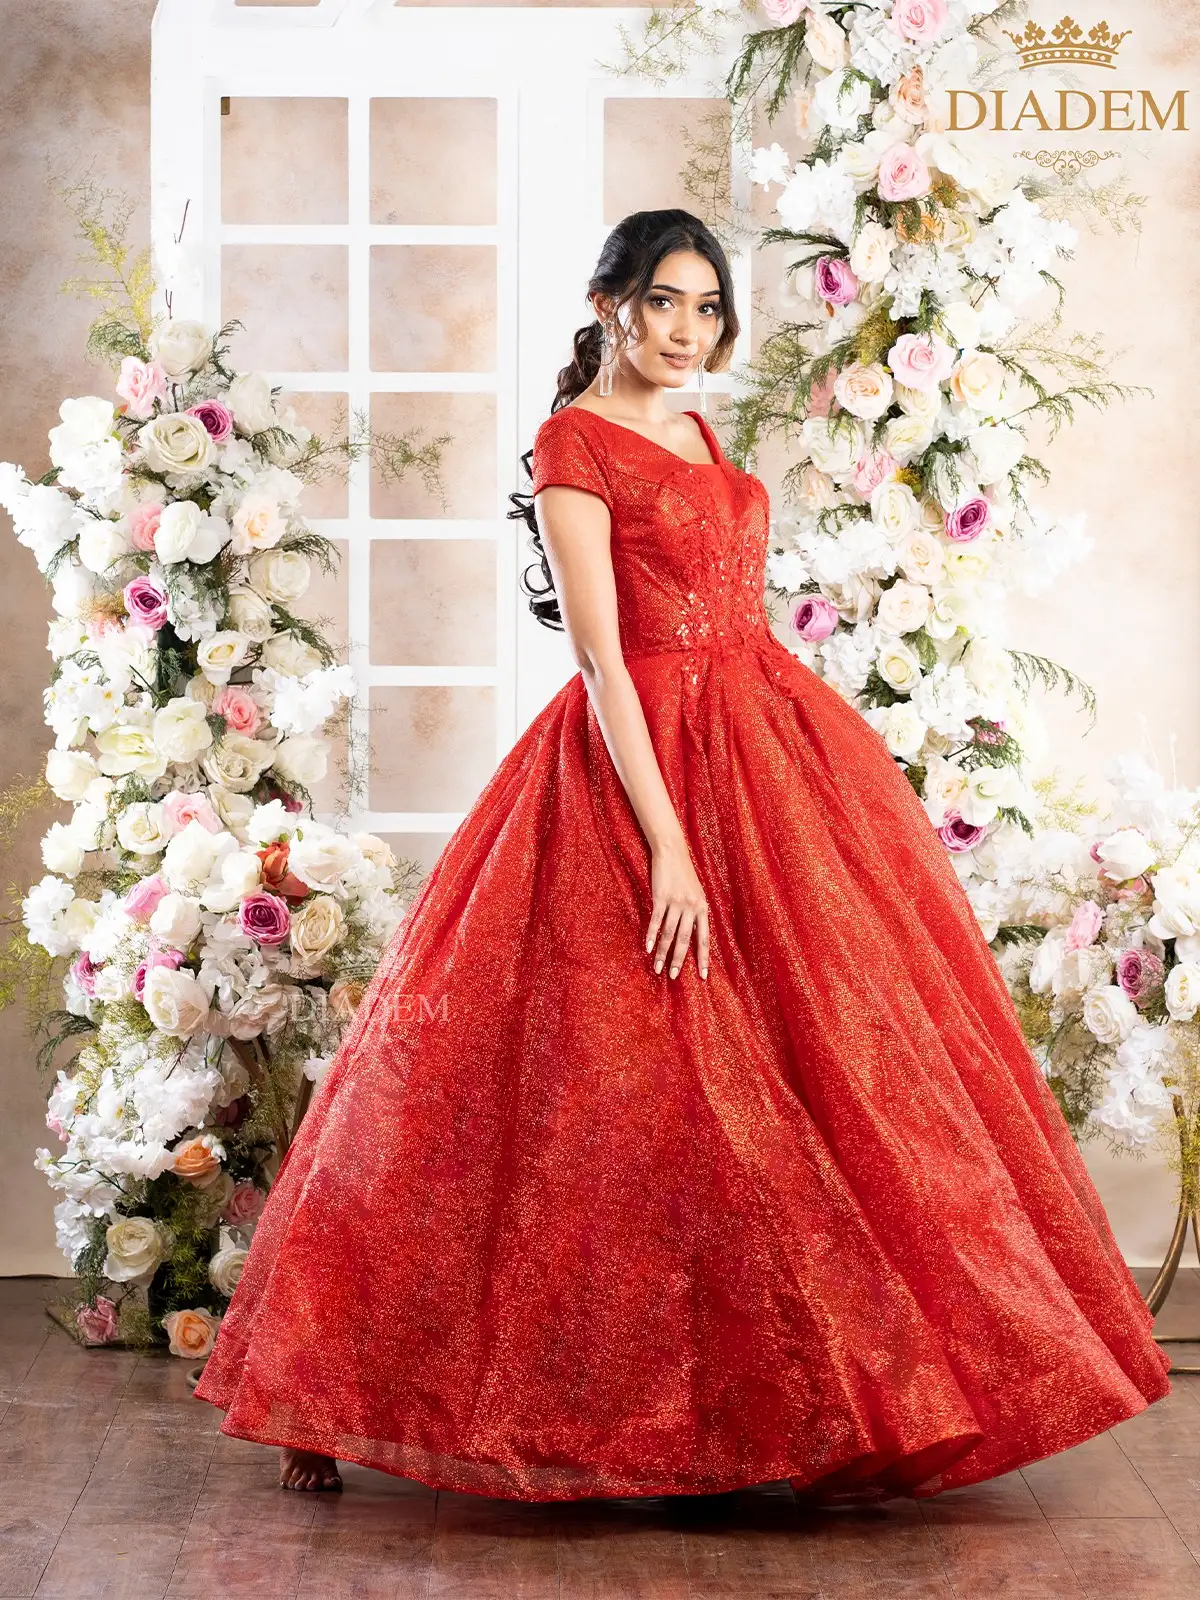 Red Net Ball Gown Embellished With Shimmers And Floral Laces